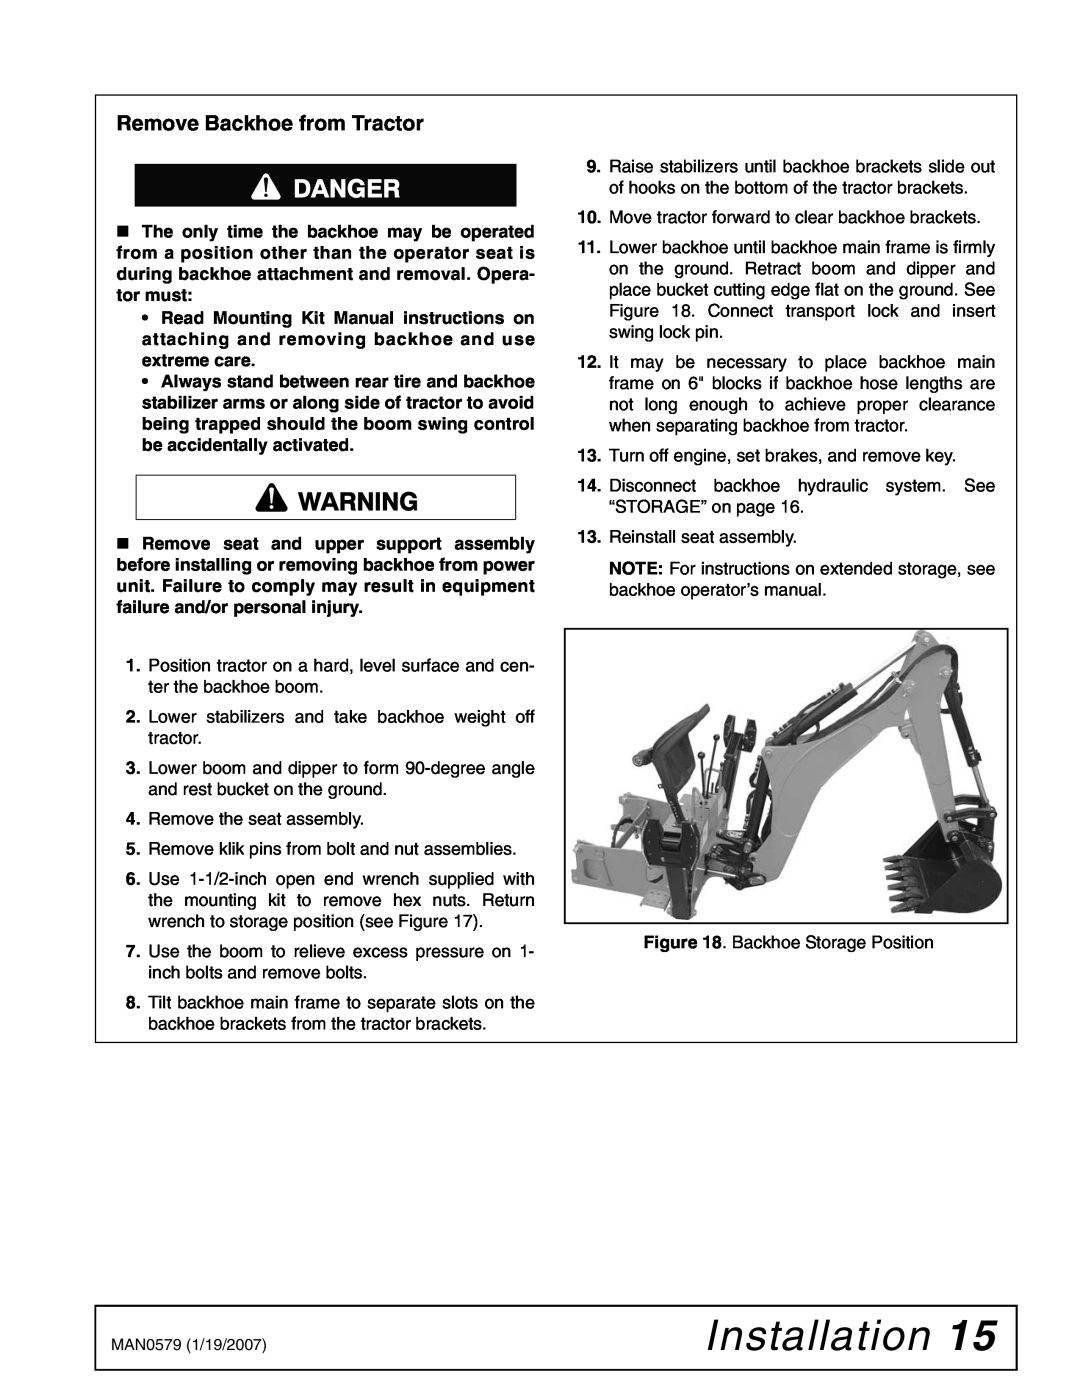 Woods Equipment 1023000 installation manual Remove Backhoe from Tractor, Installation 